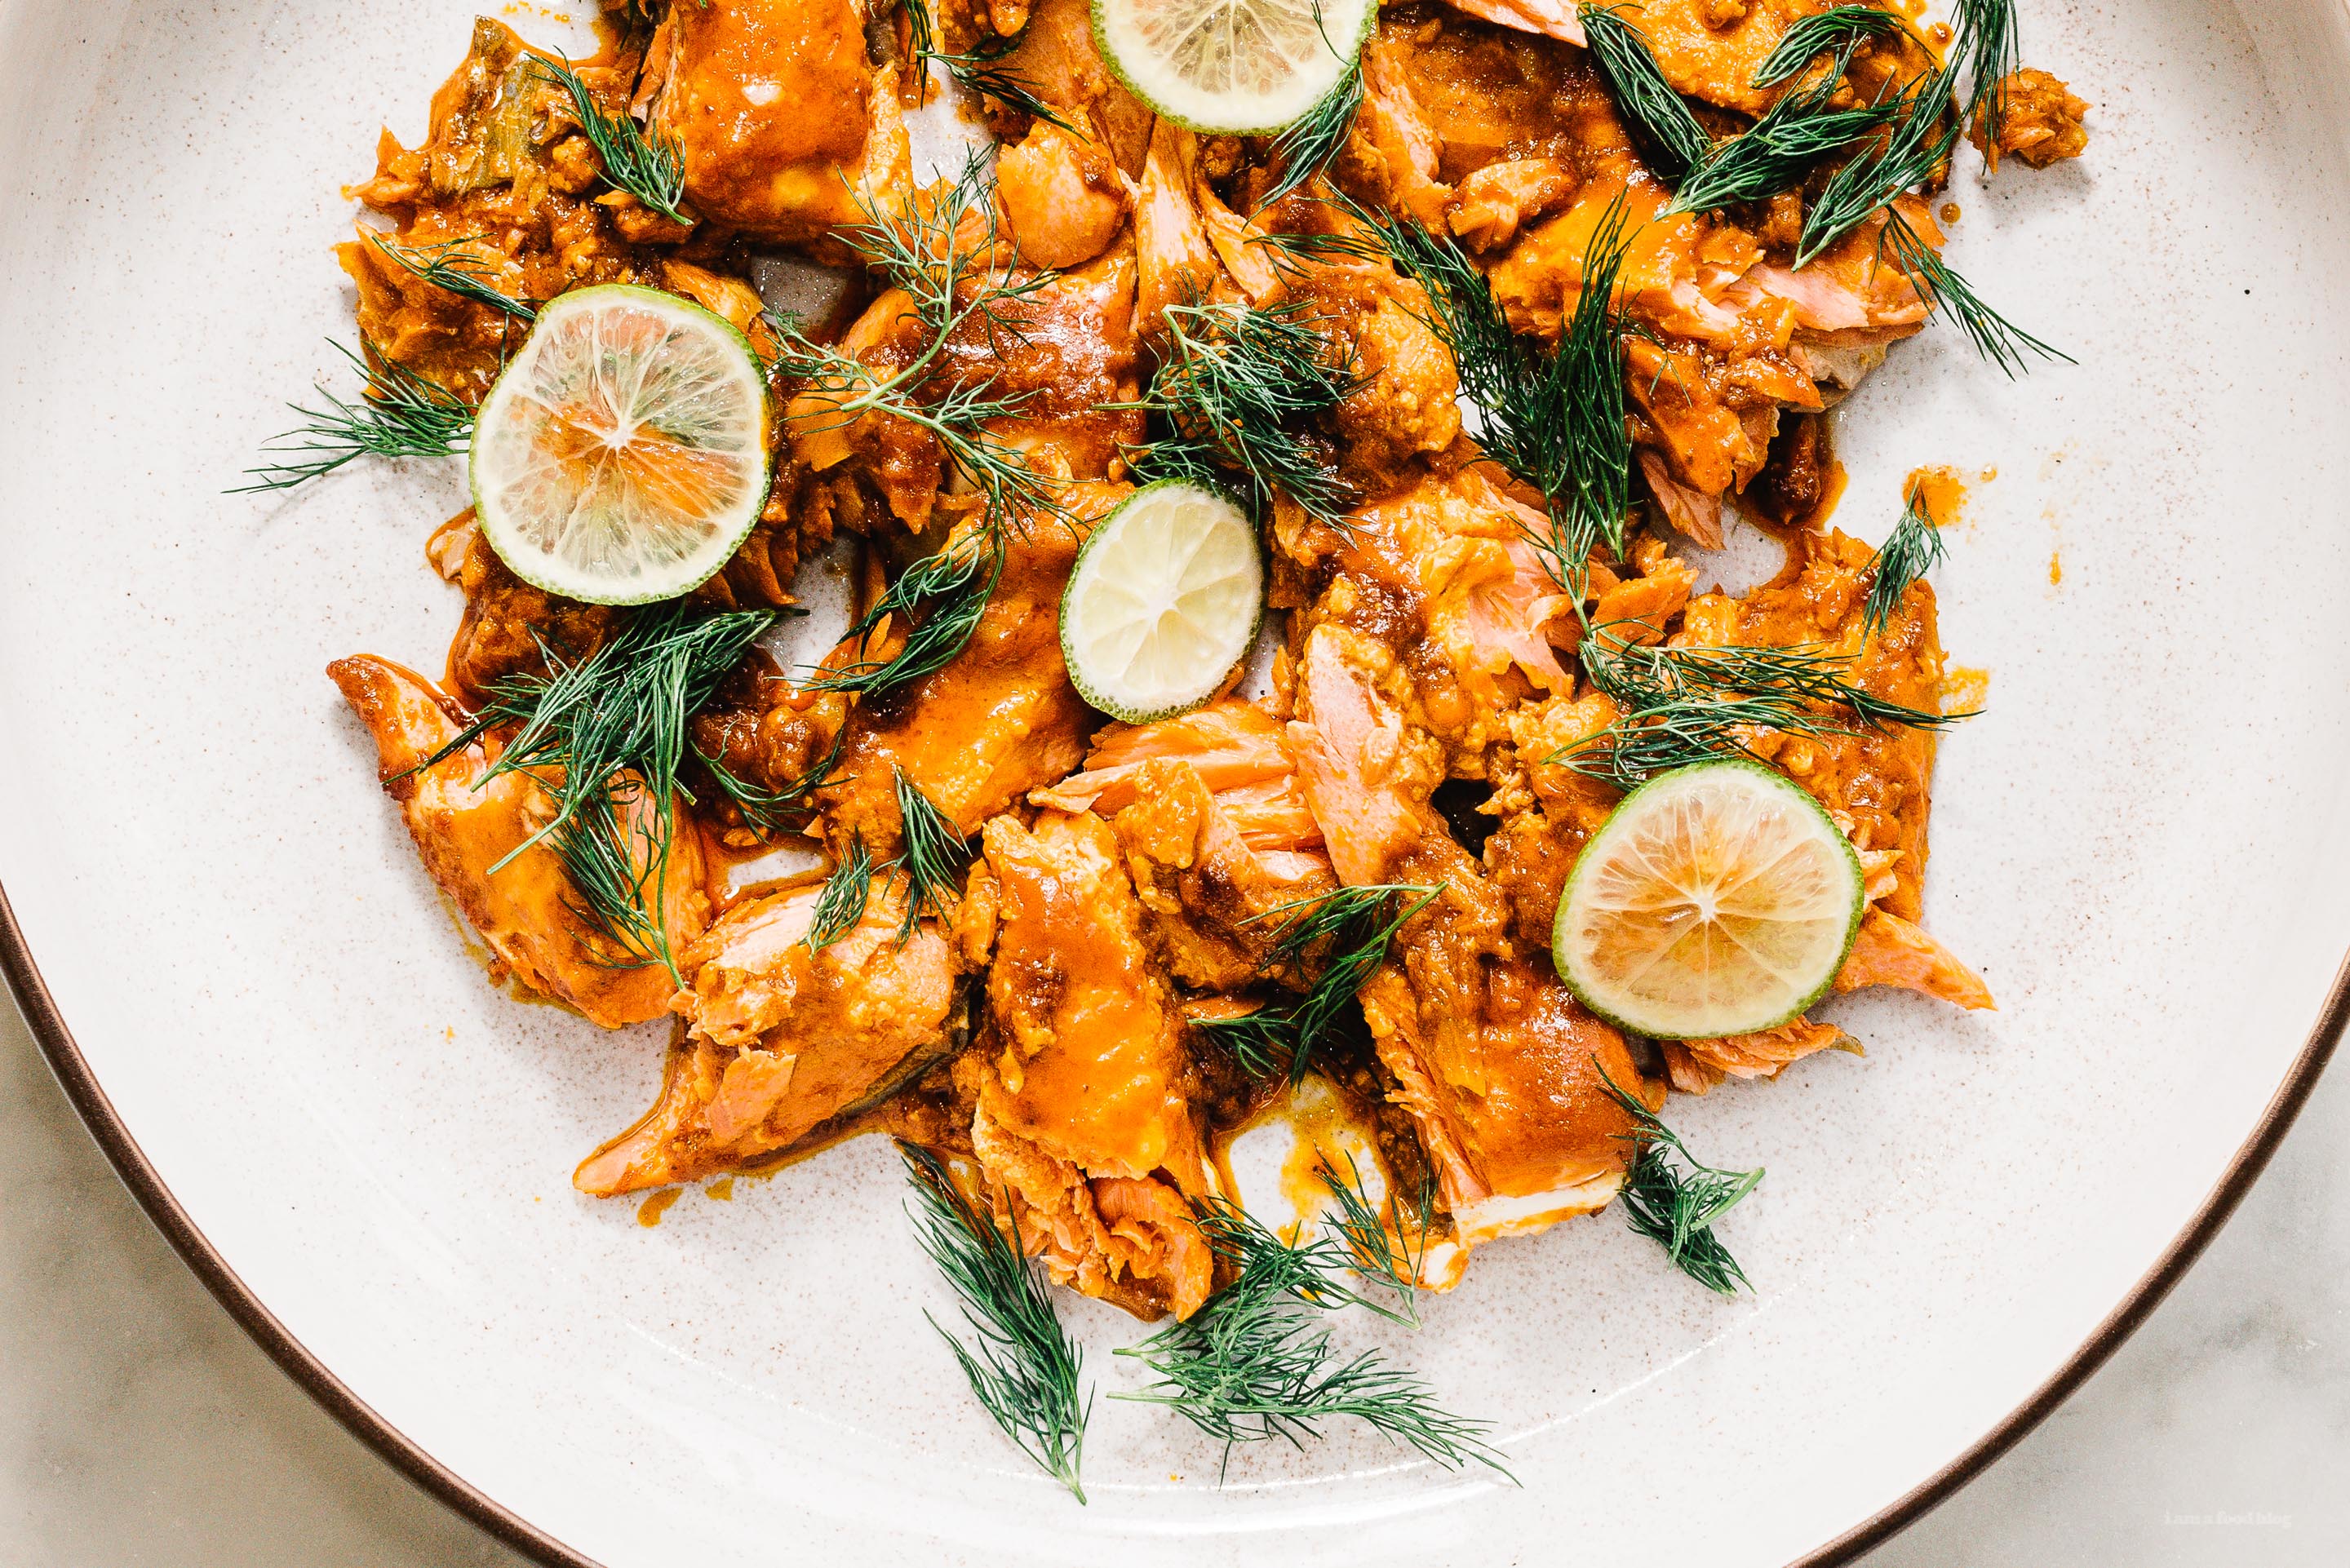 Bon Appetit’s Harissa Salmon is the Perfect Dinner Party Main